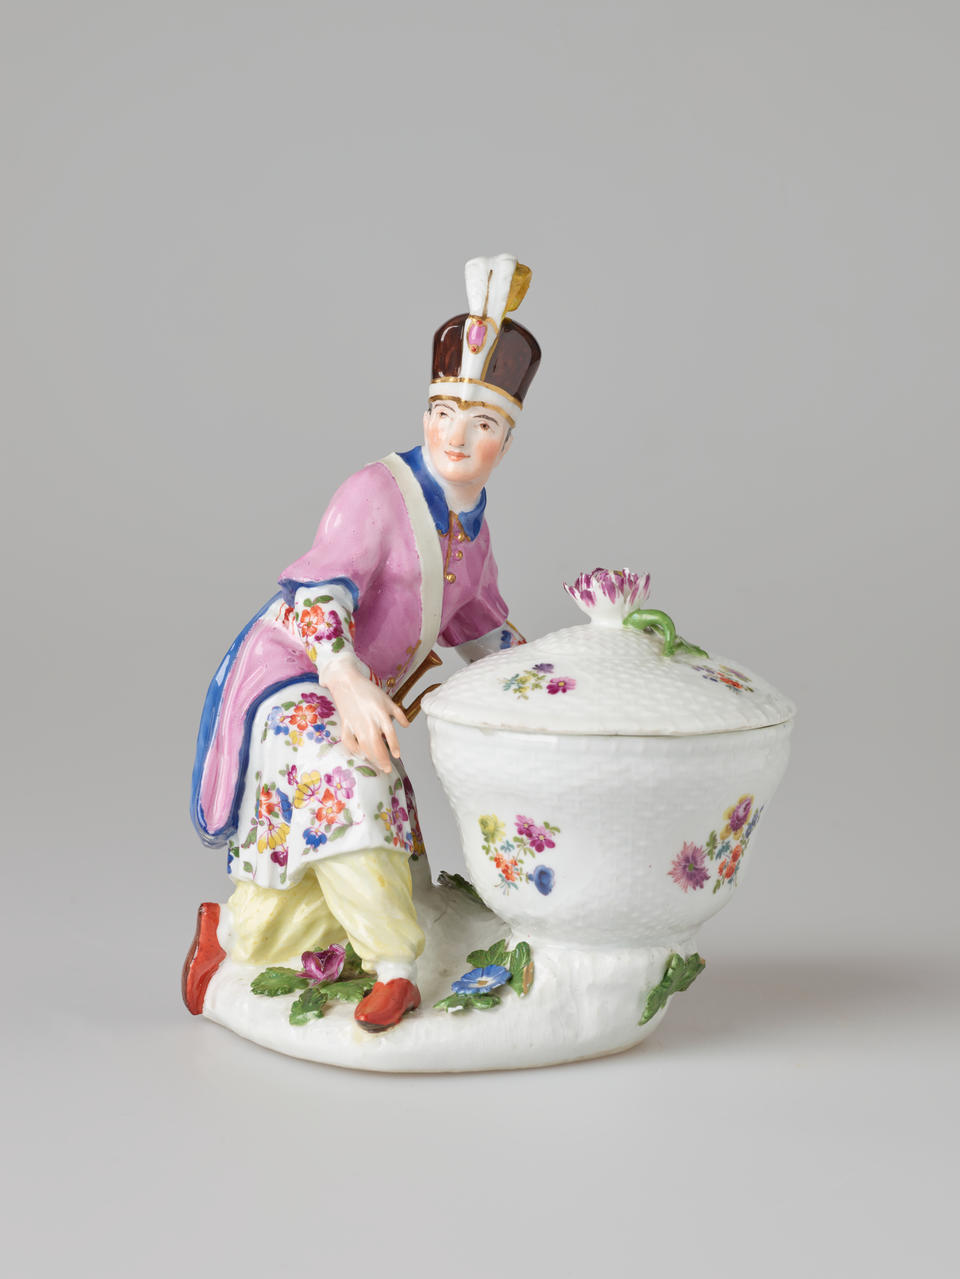 A sculptural figure kneeling next to a basket in bright elaborate clothing with a hat with a feather. There are floral decorations on the figure’s clothing and basket.